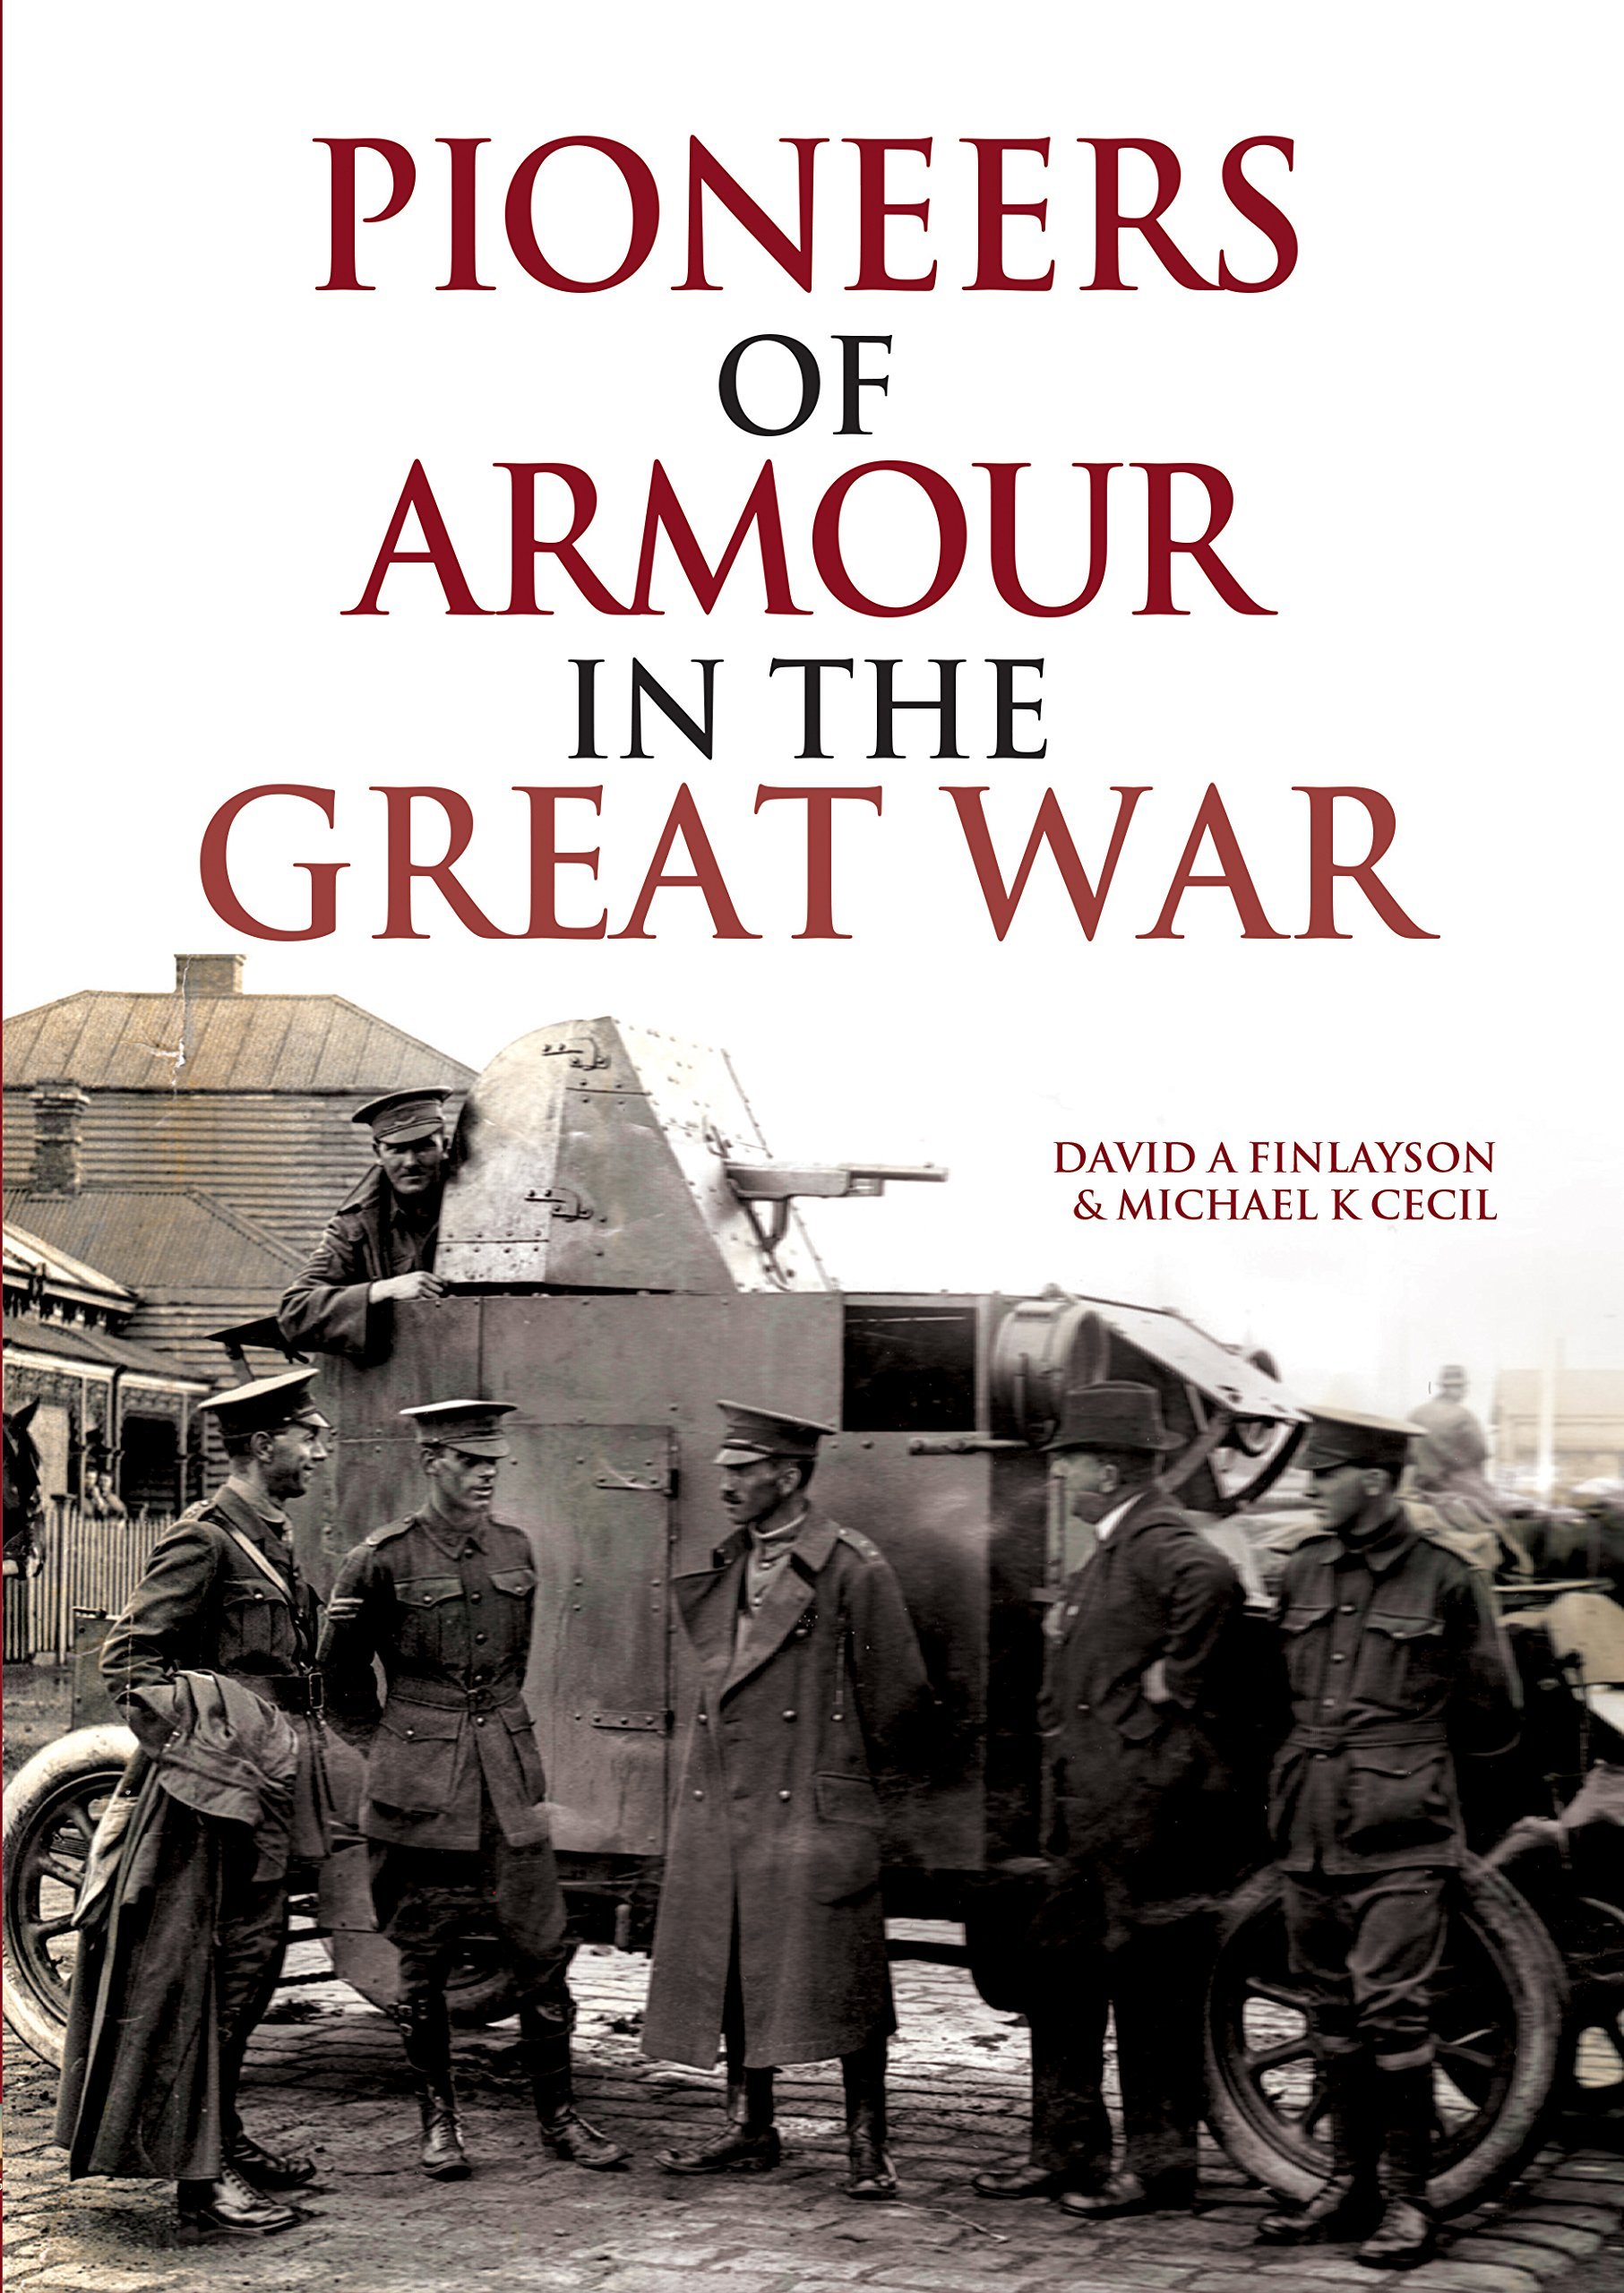 —　David　Doyle　Armour　Great　War　in　Hardcover　Pioneers　Books　of　the